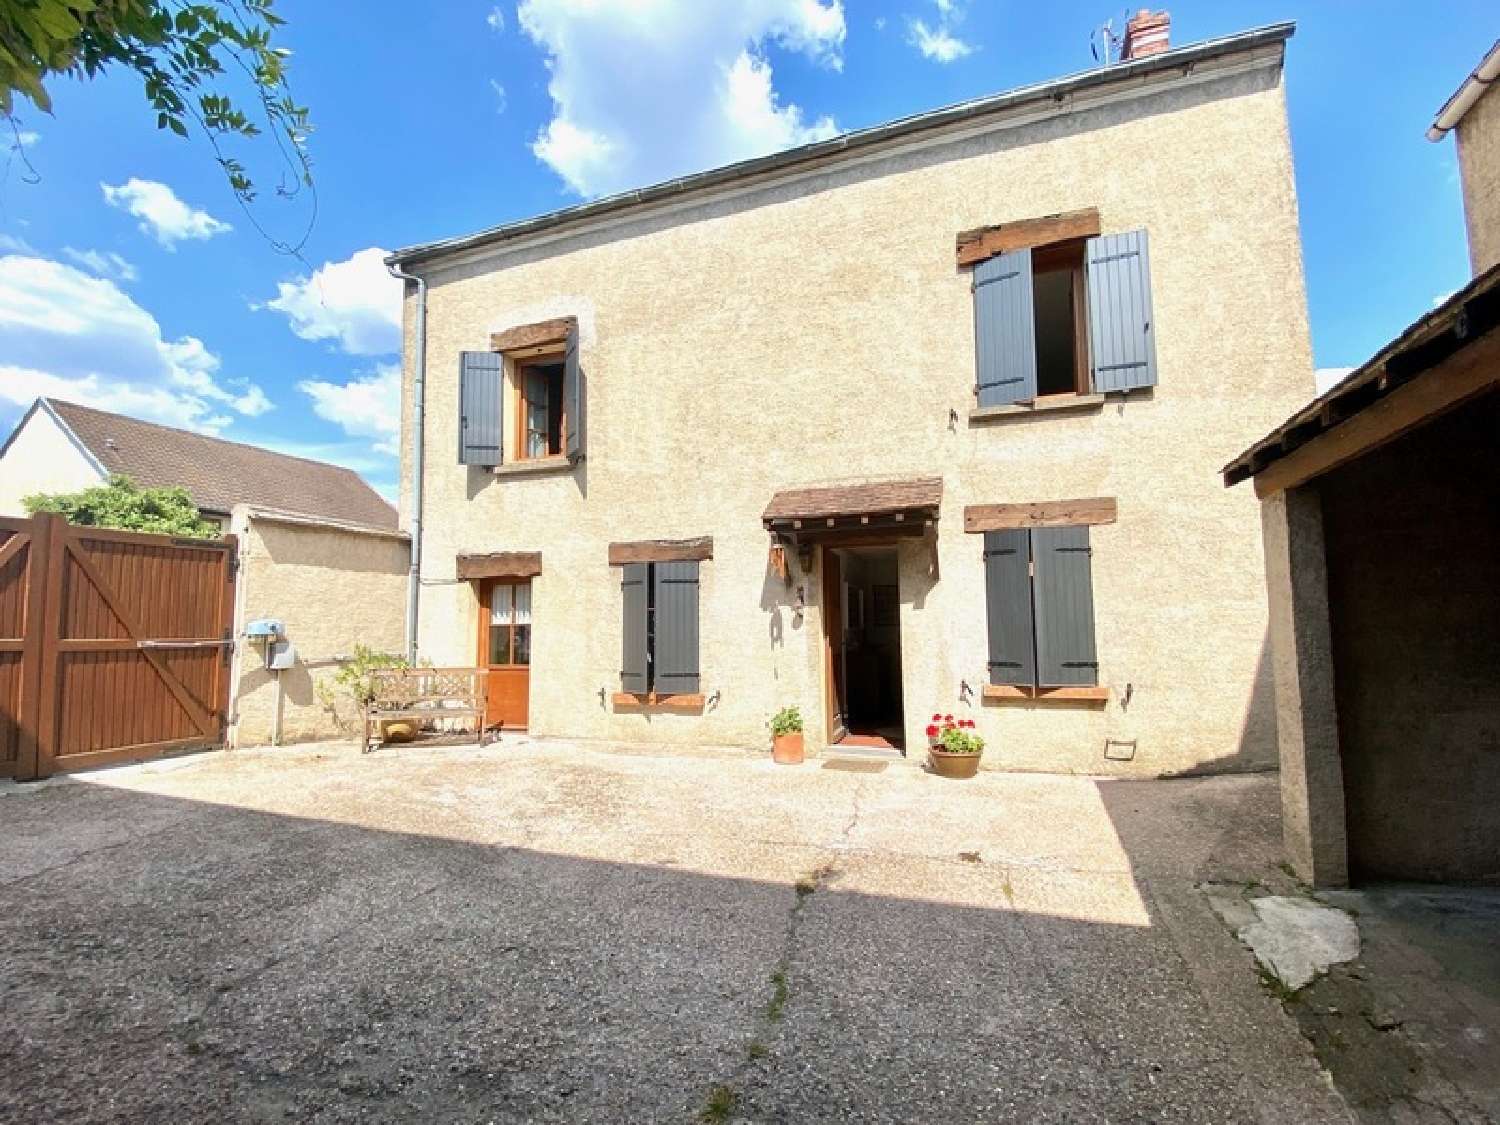  for sale village house Issou Yvelines 4